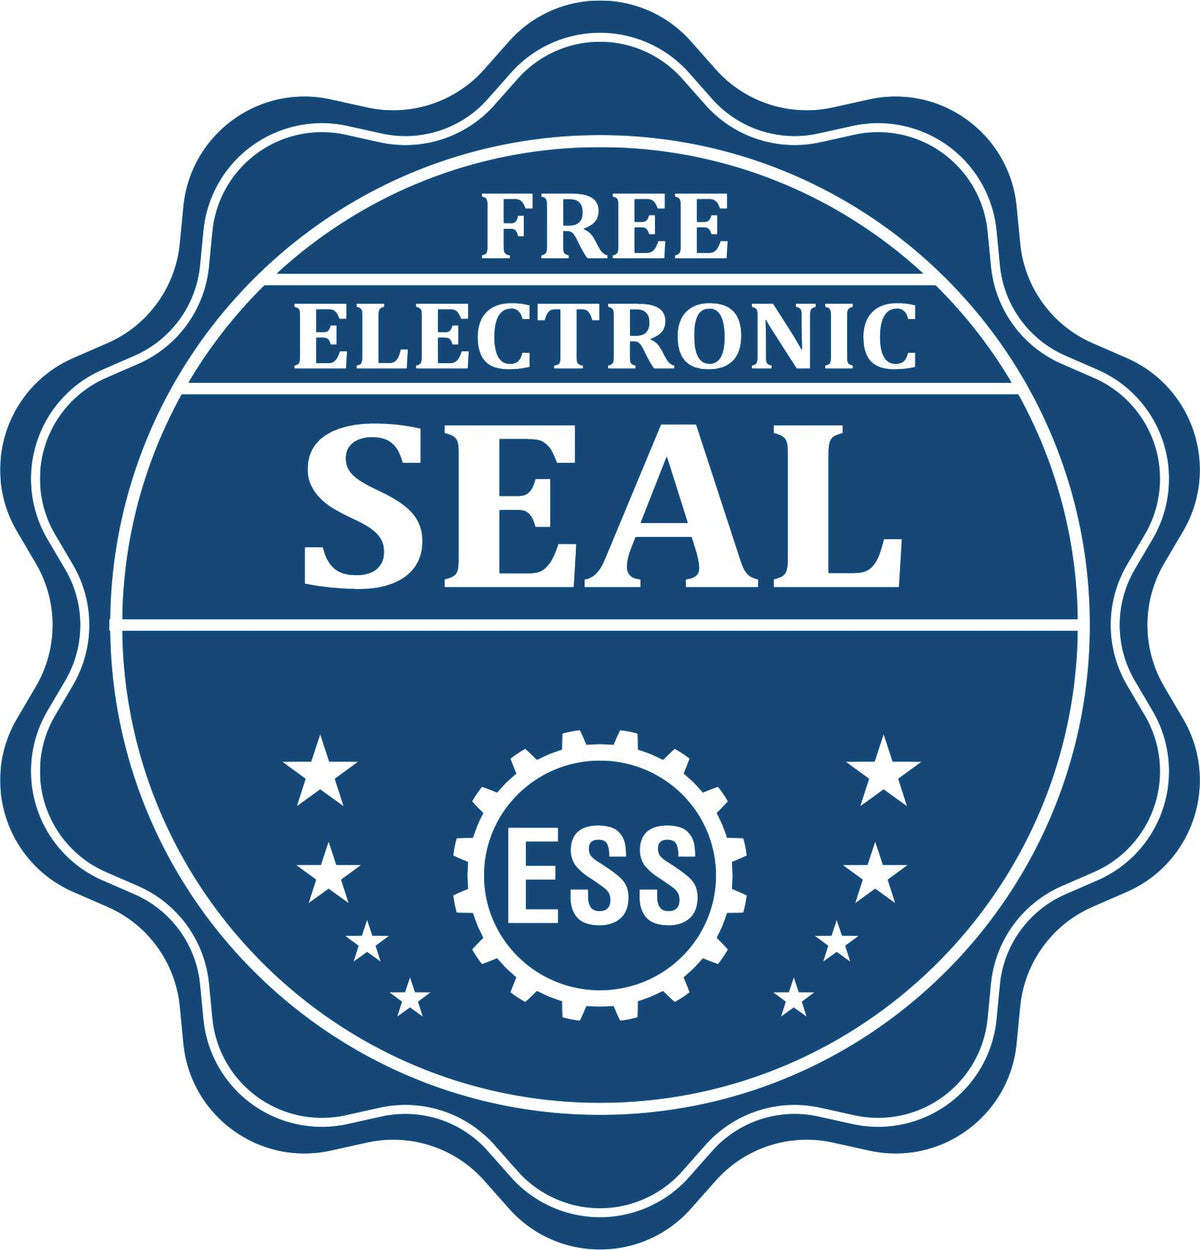 A badge showing a free electronic seal for the Slim Pre-Inked Guam Landscape Architect Seal Stamp with stars and the ESS gear on the emblem.